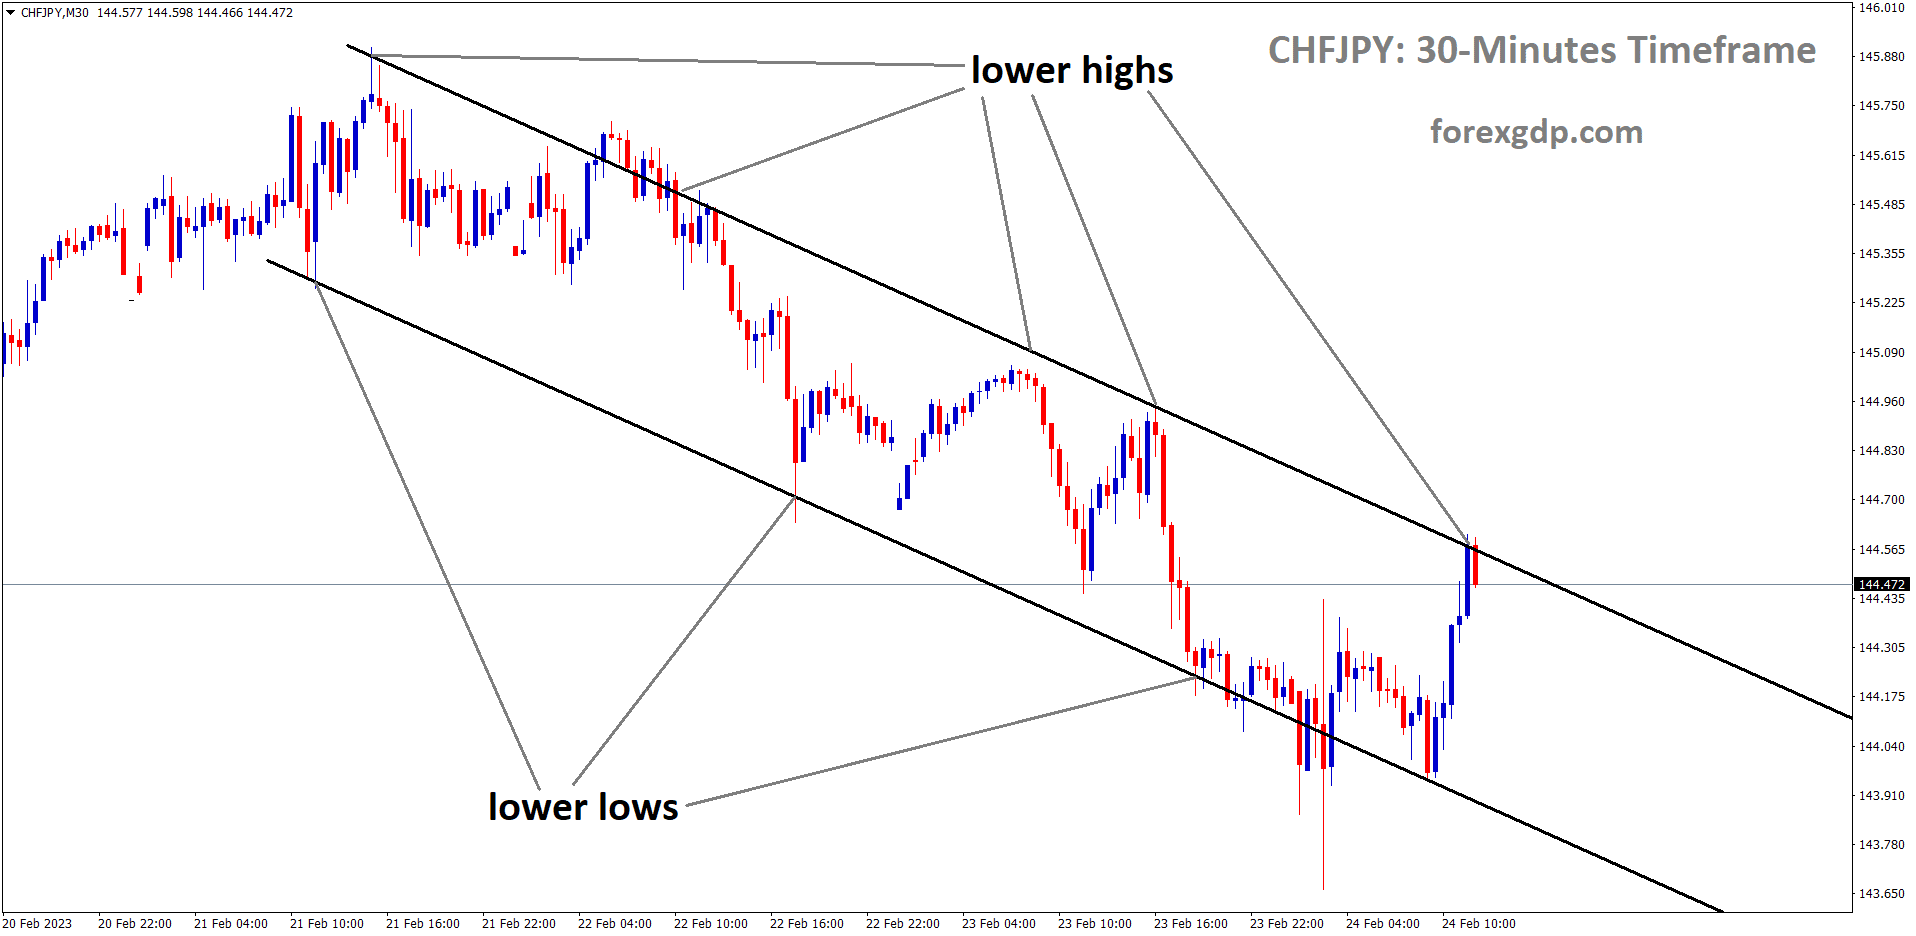 CHFJPY is moving in Descending channel and the market has reached lower high area of the channel.